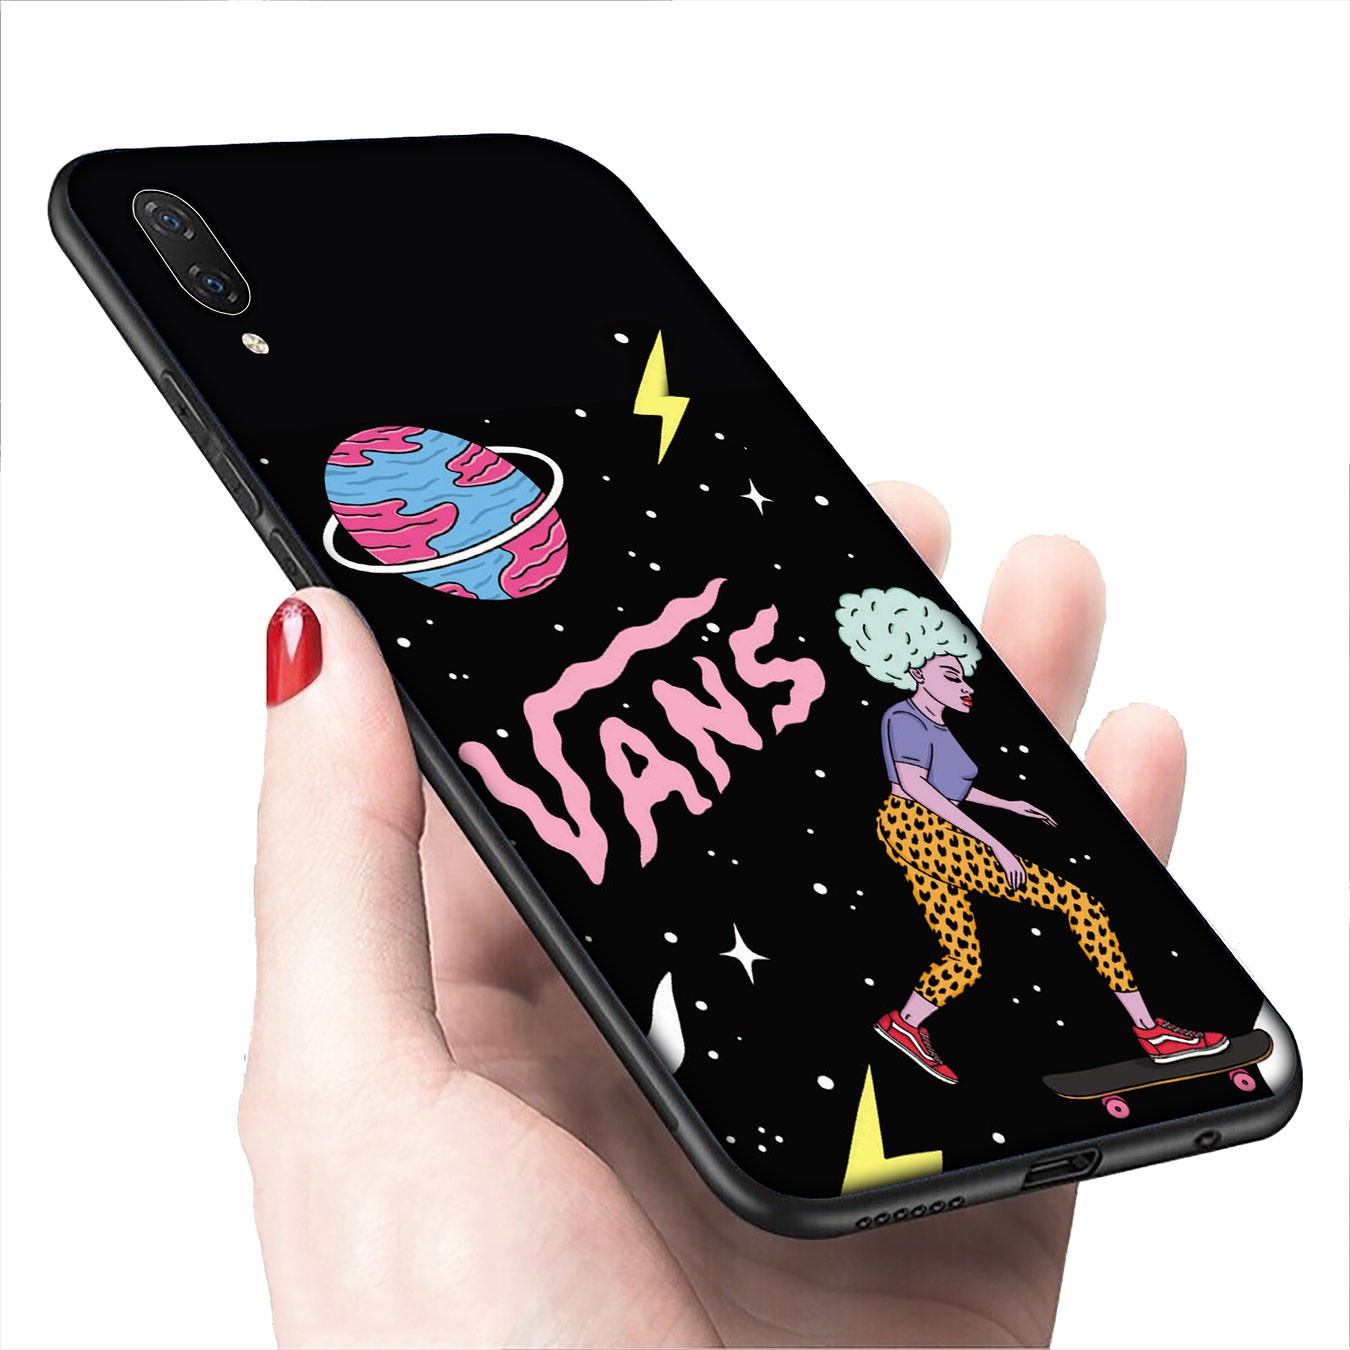 Soft Silicone iPhone 11 Pro XR X XS Max 7 8 6 6s Plus + Cover Vans Art Cartoon Phone Case